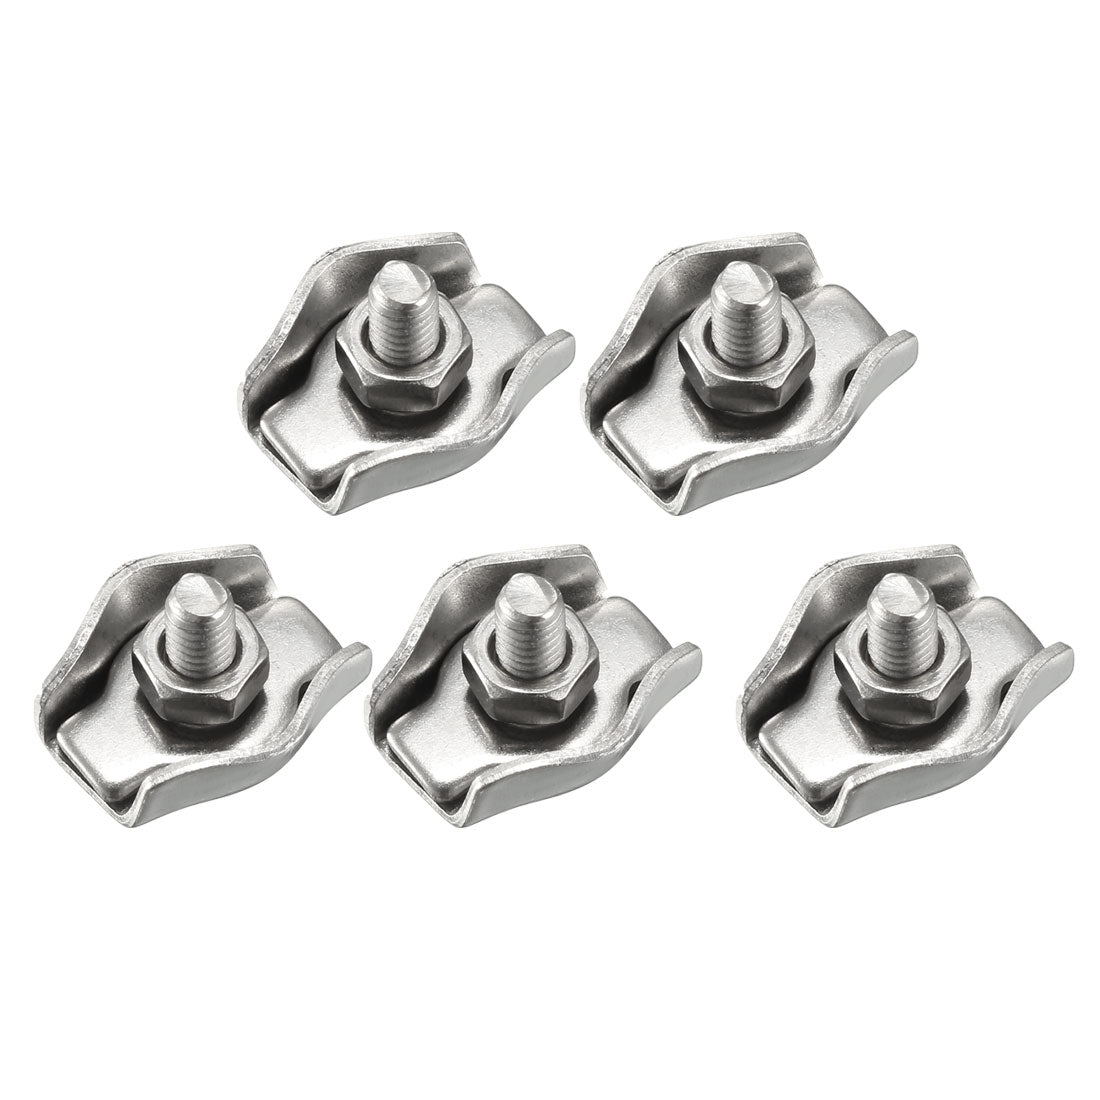 uxcell Uxcell 5 Pcs 304 Stainless Steel Single Wire Rope Clip Cable Clamp for 1.5mm-2mm Rope